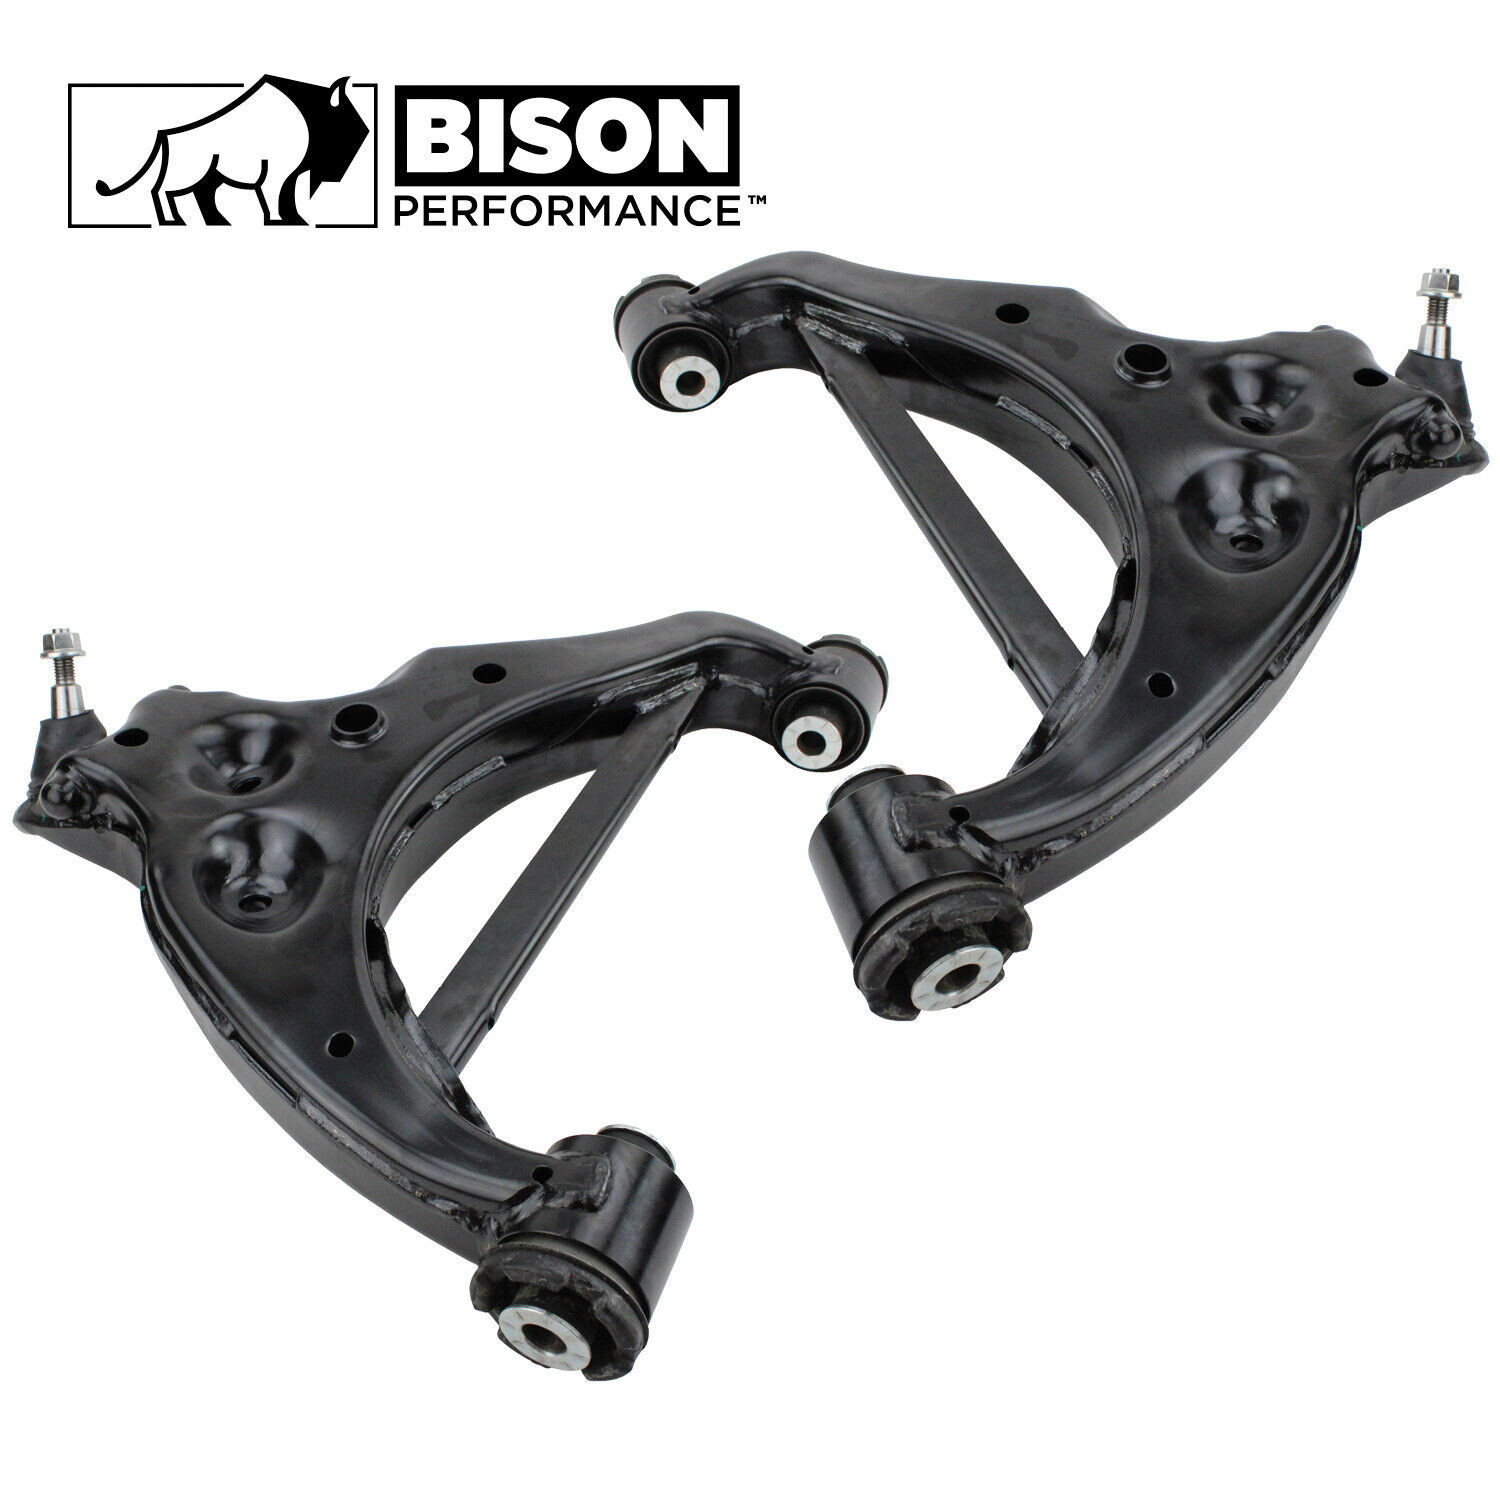 Bison Performance 2pc Set Front Lower Control Arm For Expedition F-150 Navigator